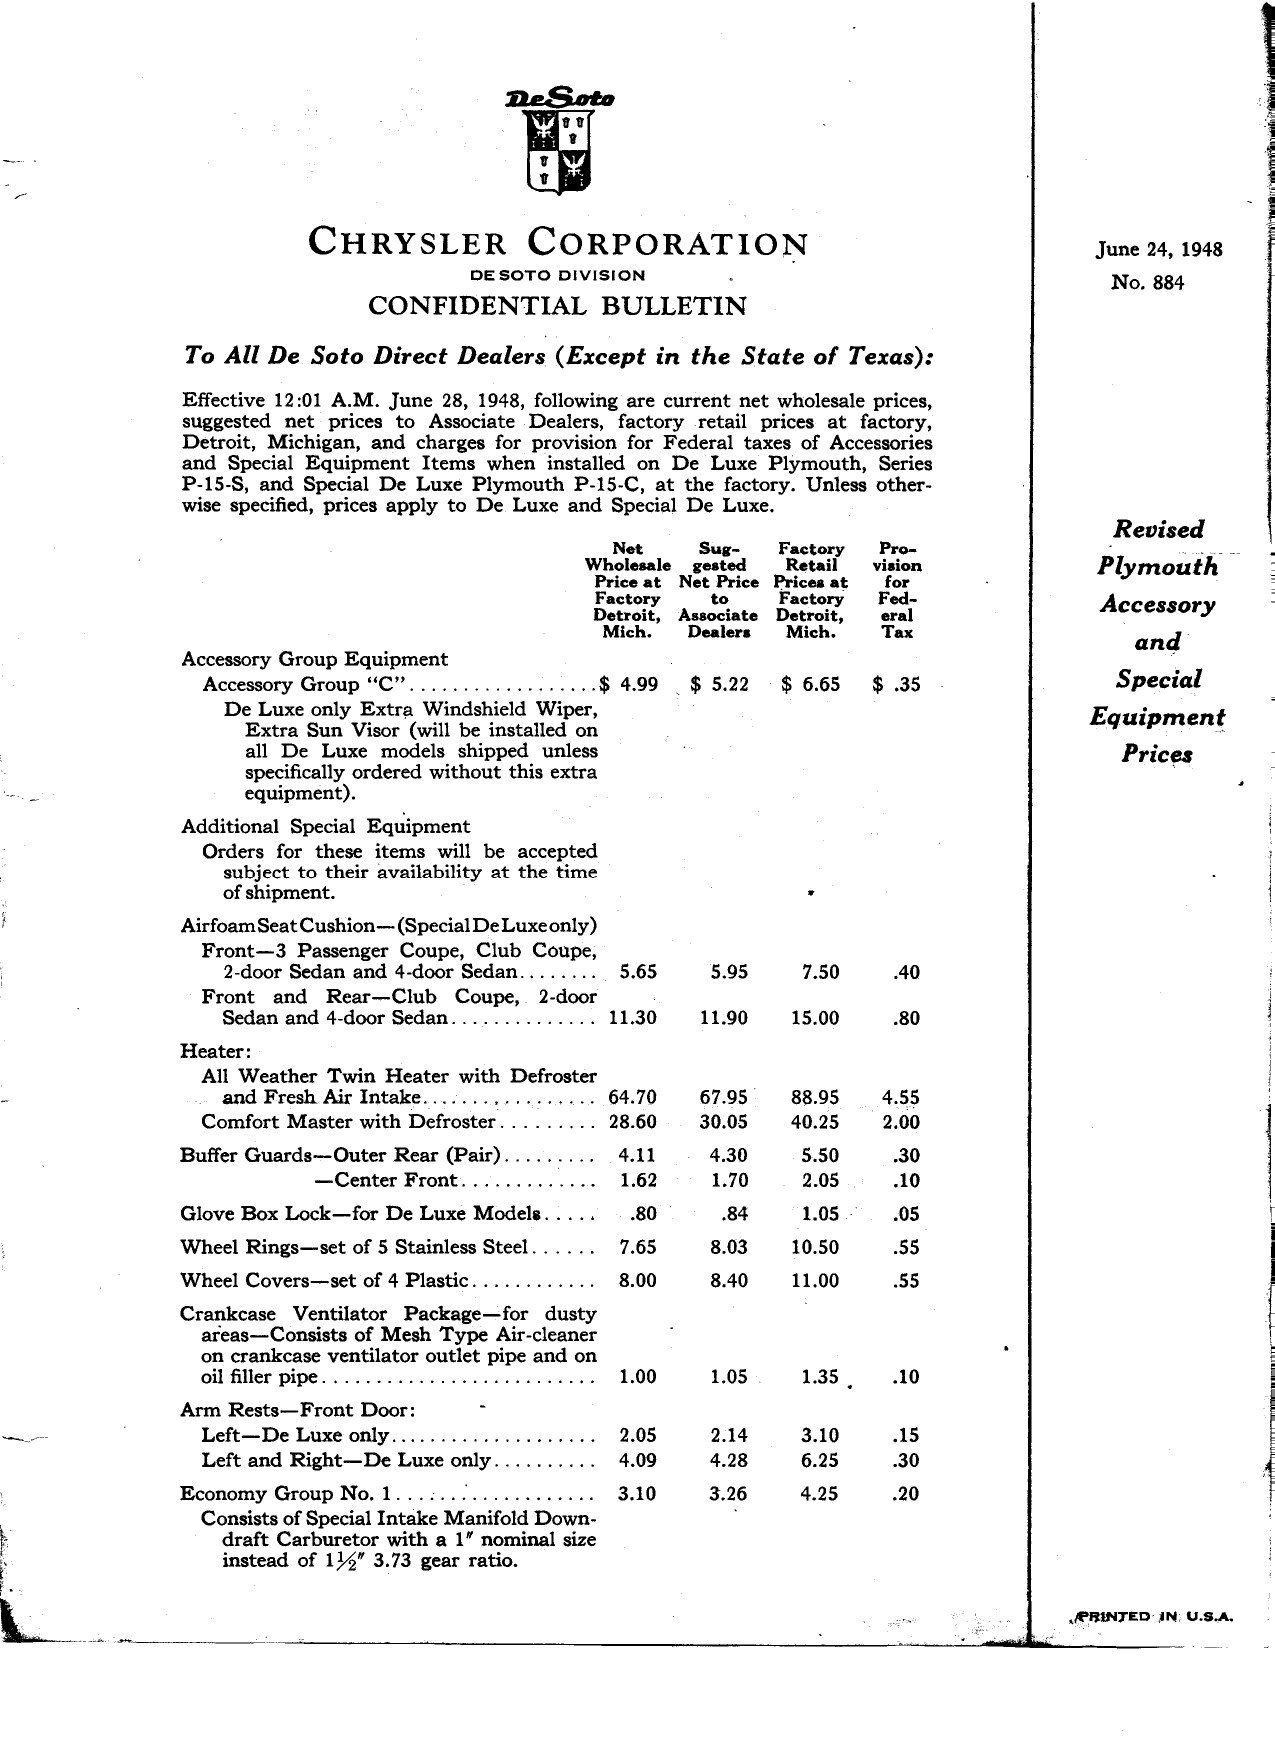 1948_Plymouth_Revised_Accessory_Prices-01